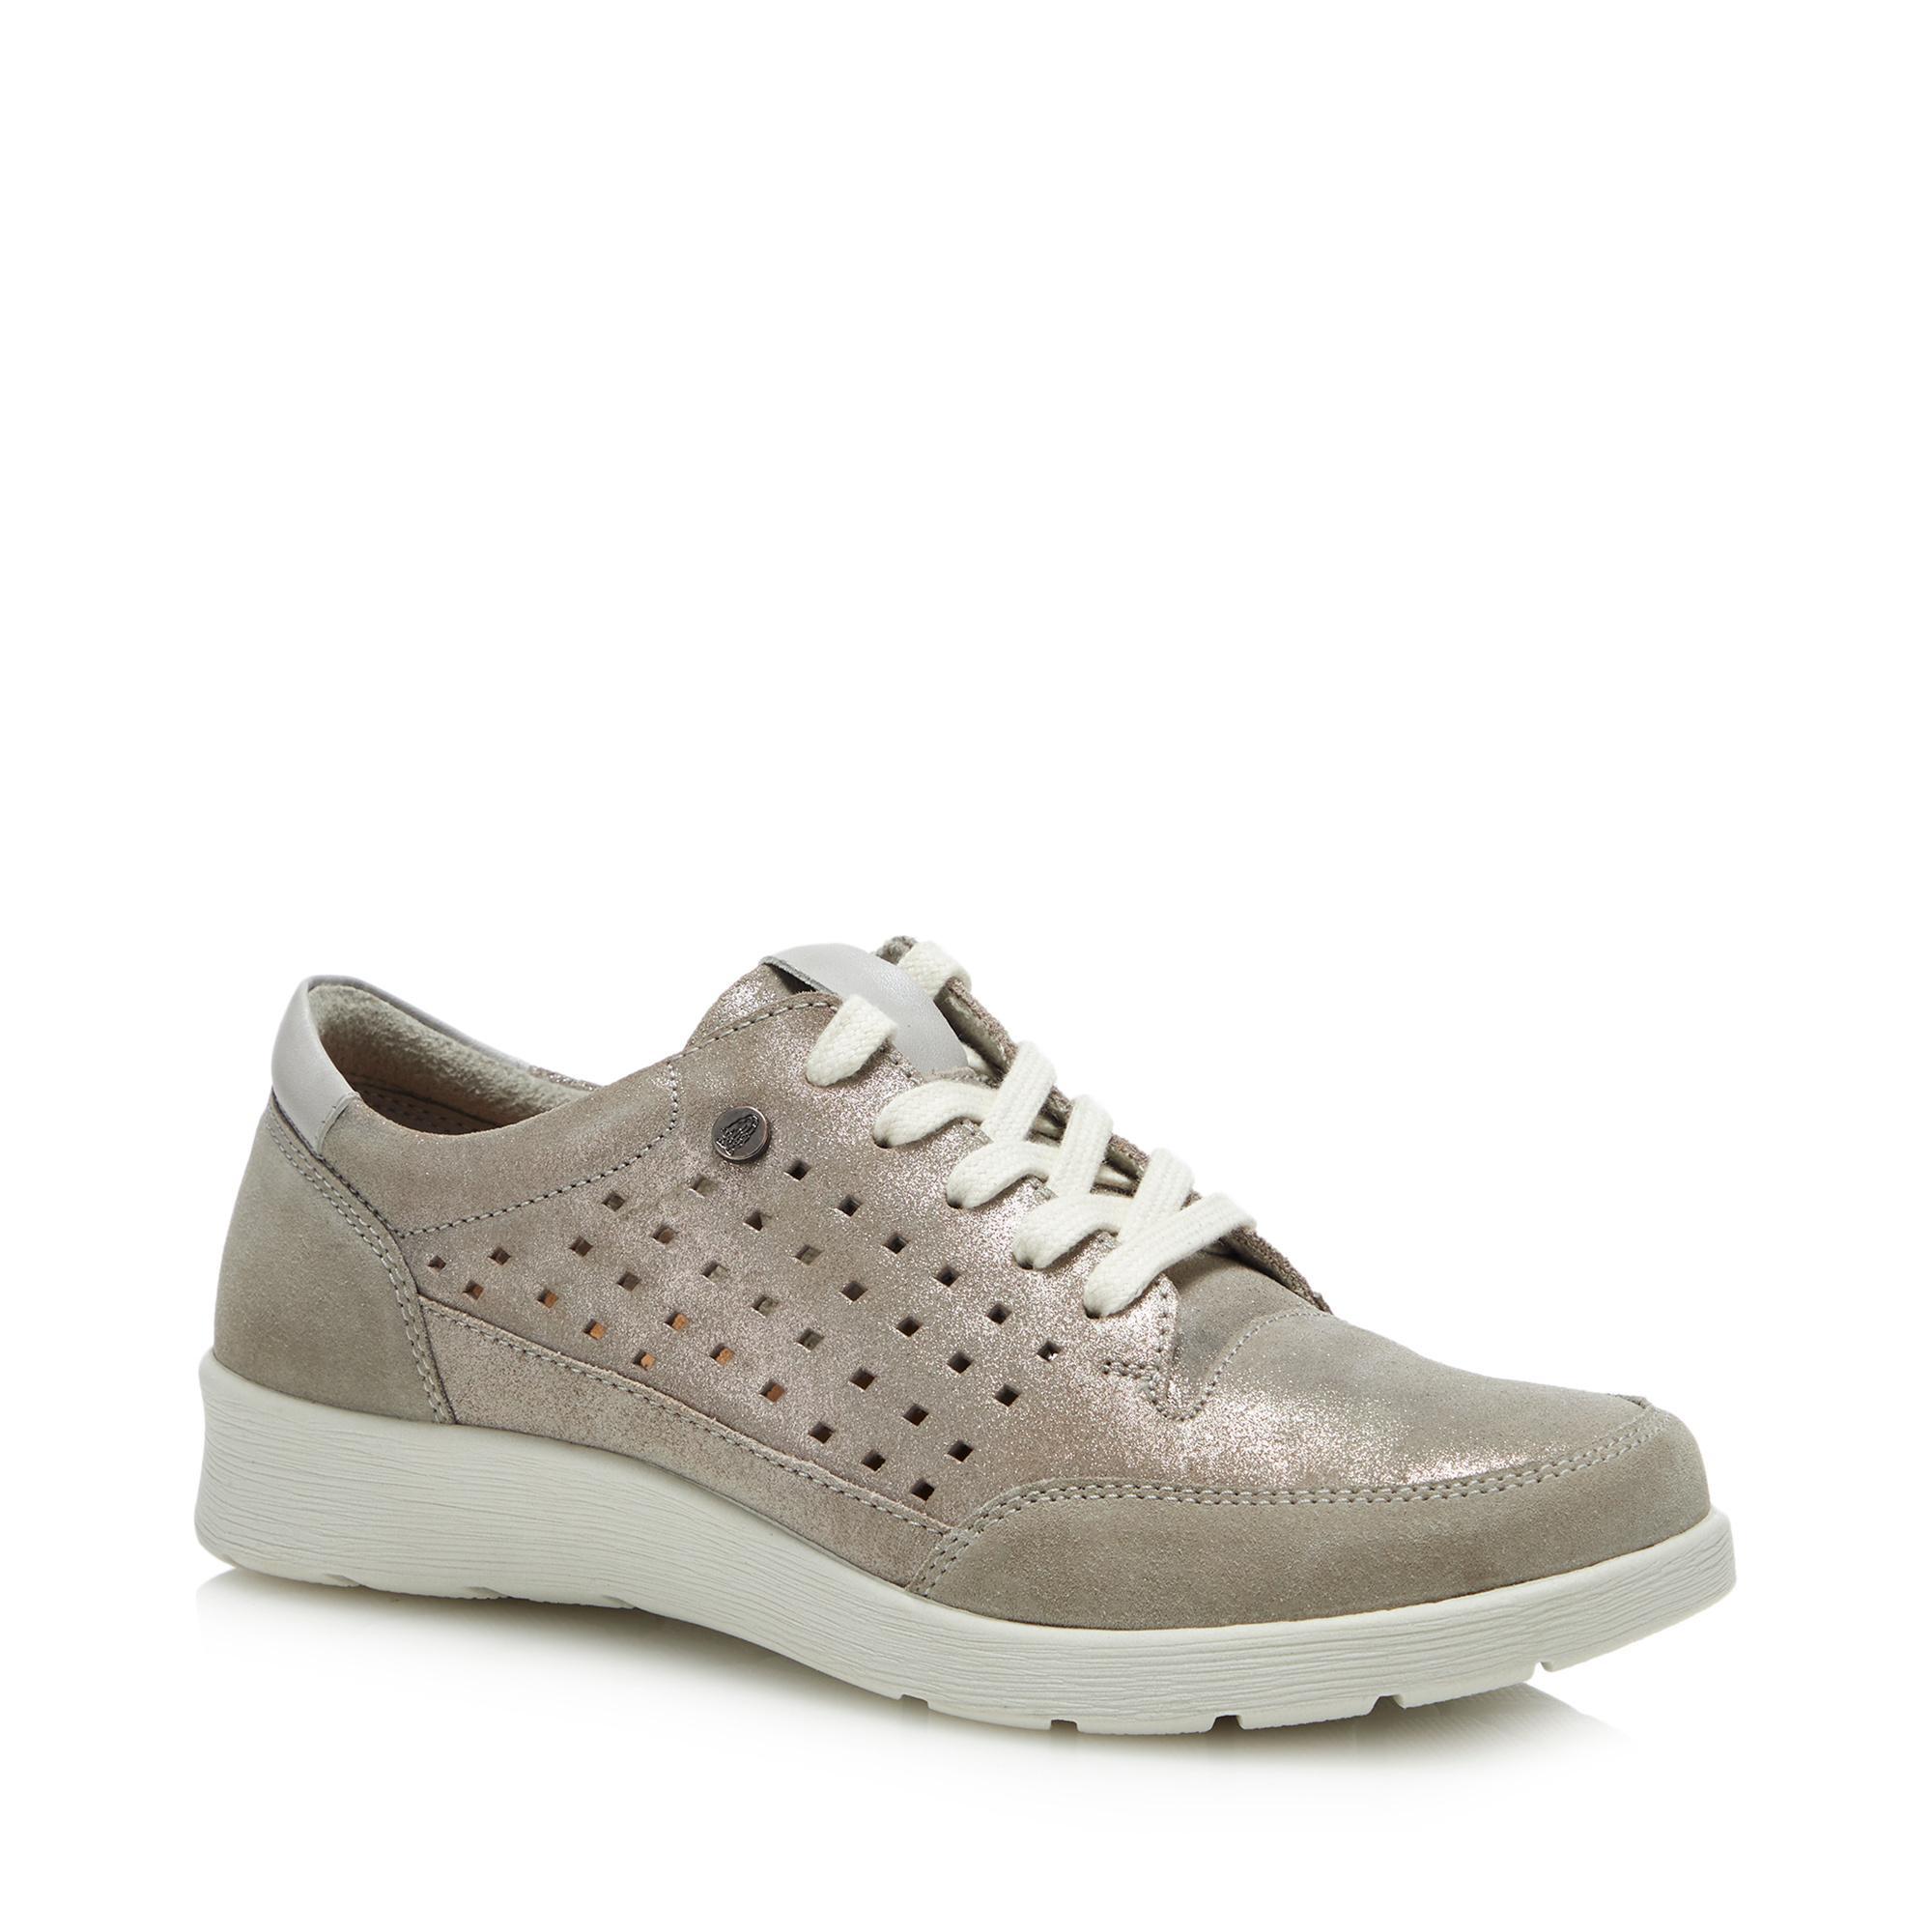 Hush Puppies Leather 'molly' Lace-up Shoes in Silver (Metallic) - Lyst